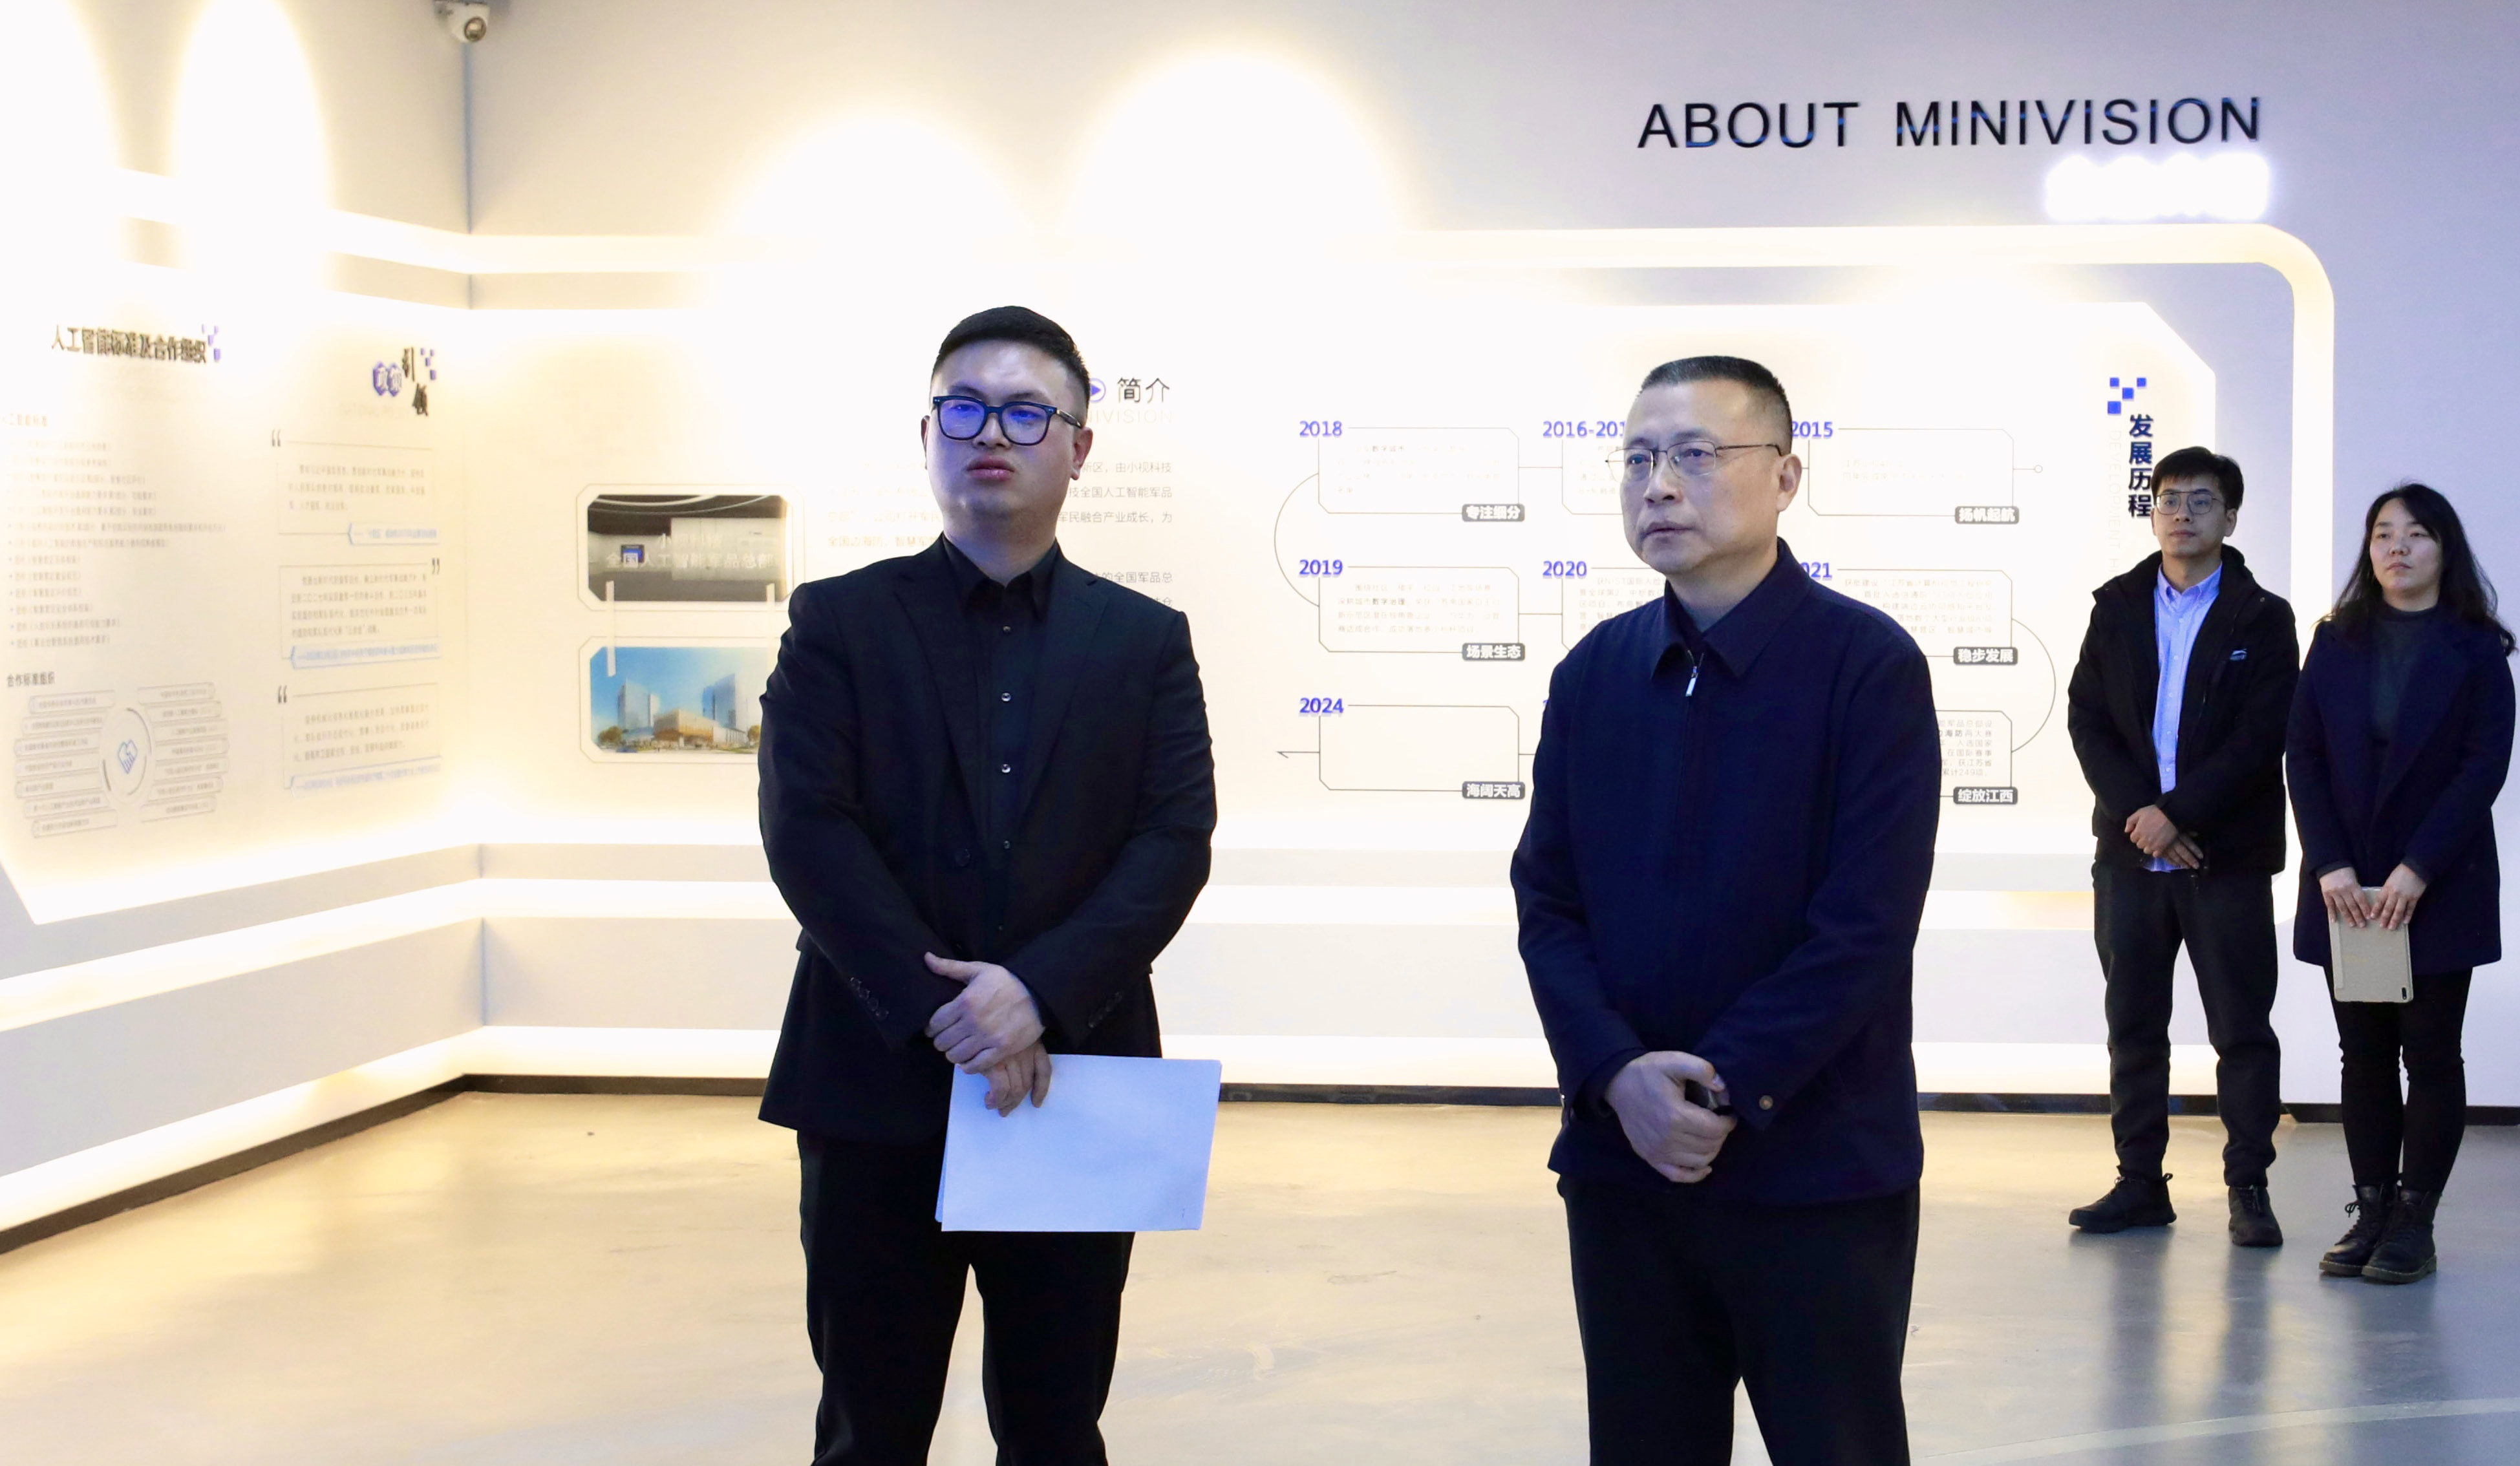 Xiao Yuwen, Deputy Secretary of the Party Working Committee and Director of the Management Committee of Ganjiang New Area, conducted an investigation and research on Jiangxi Minivision